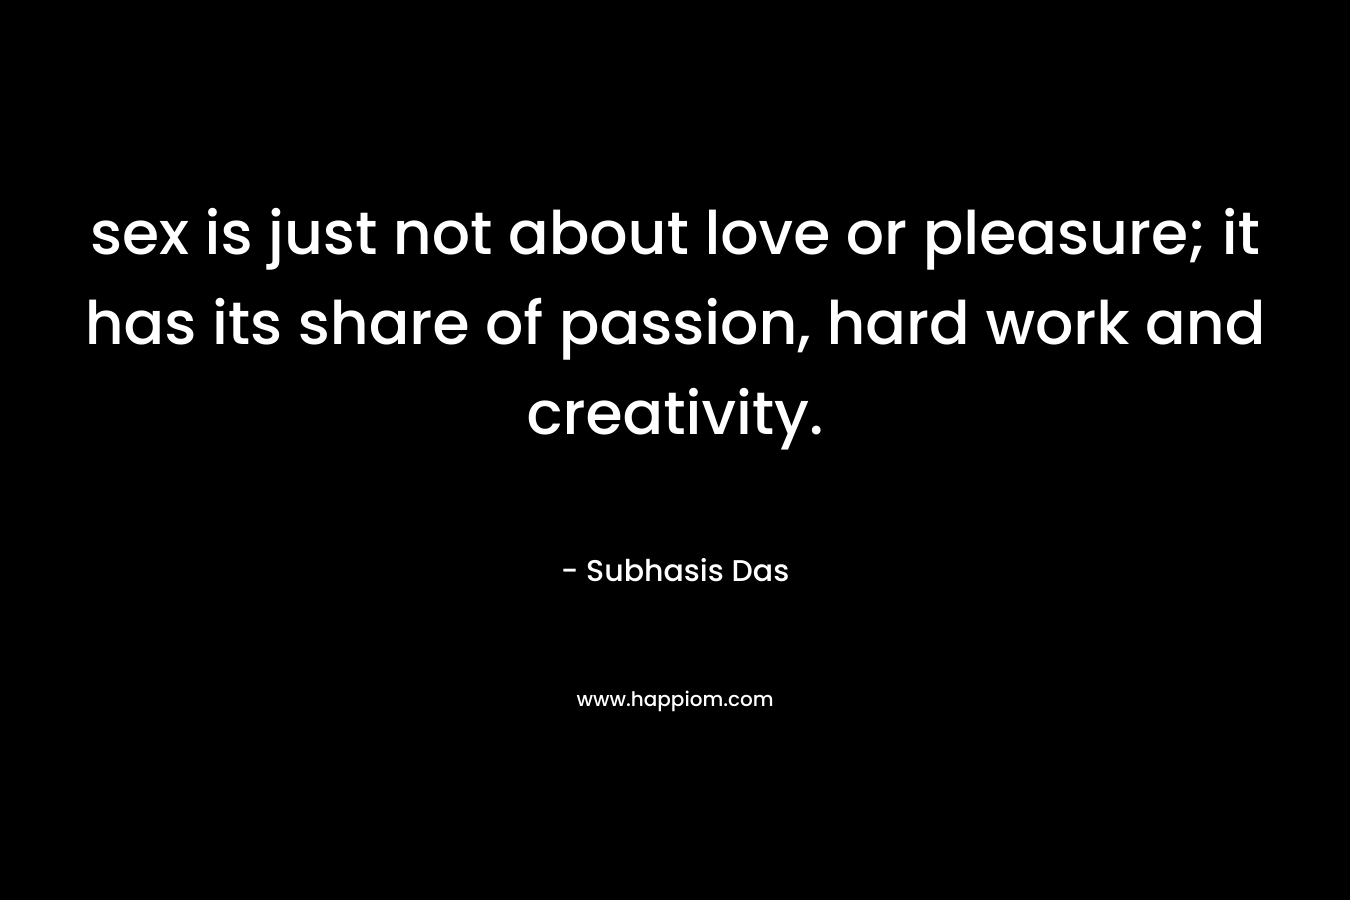 sex is just not about love or pleasure; it has its share of passion, hard work and creativity.